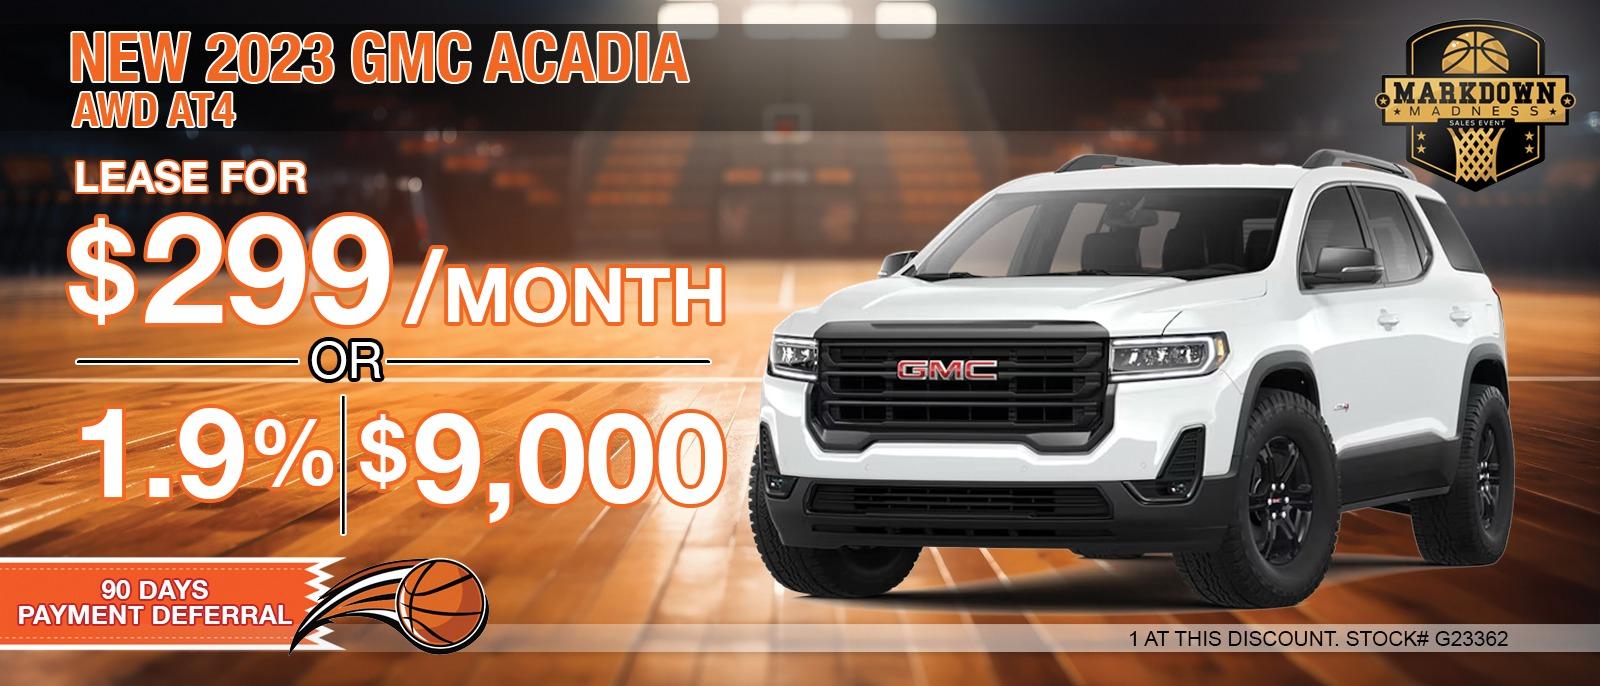 2023 GMC ACADIA AT4.  SAVE UP TO $9,000 OFF MSRP.